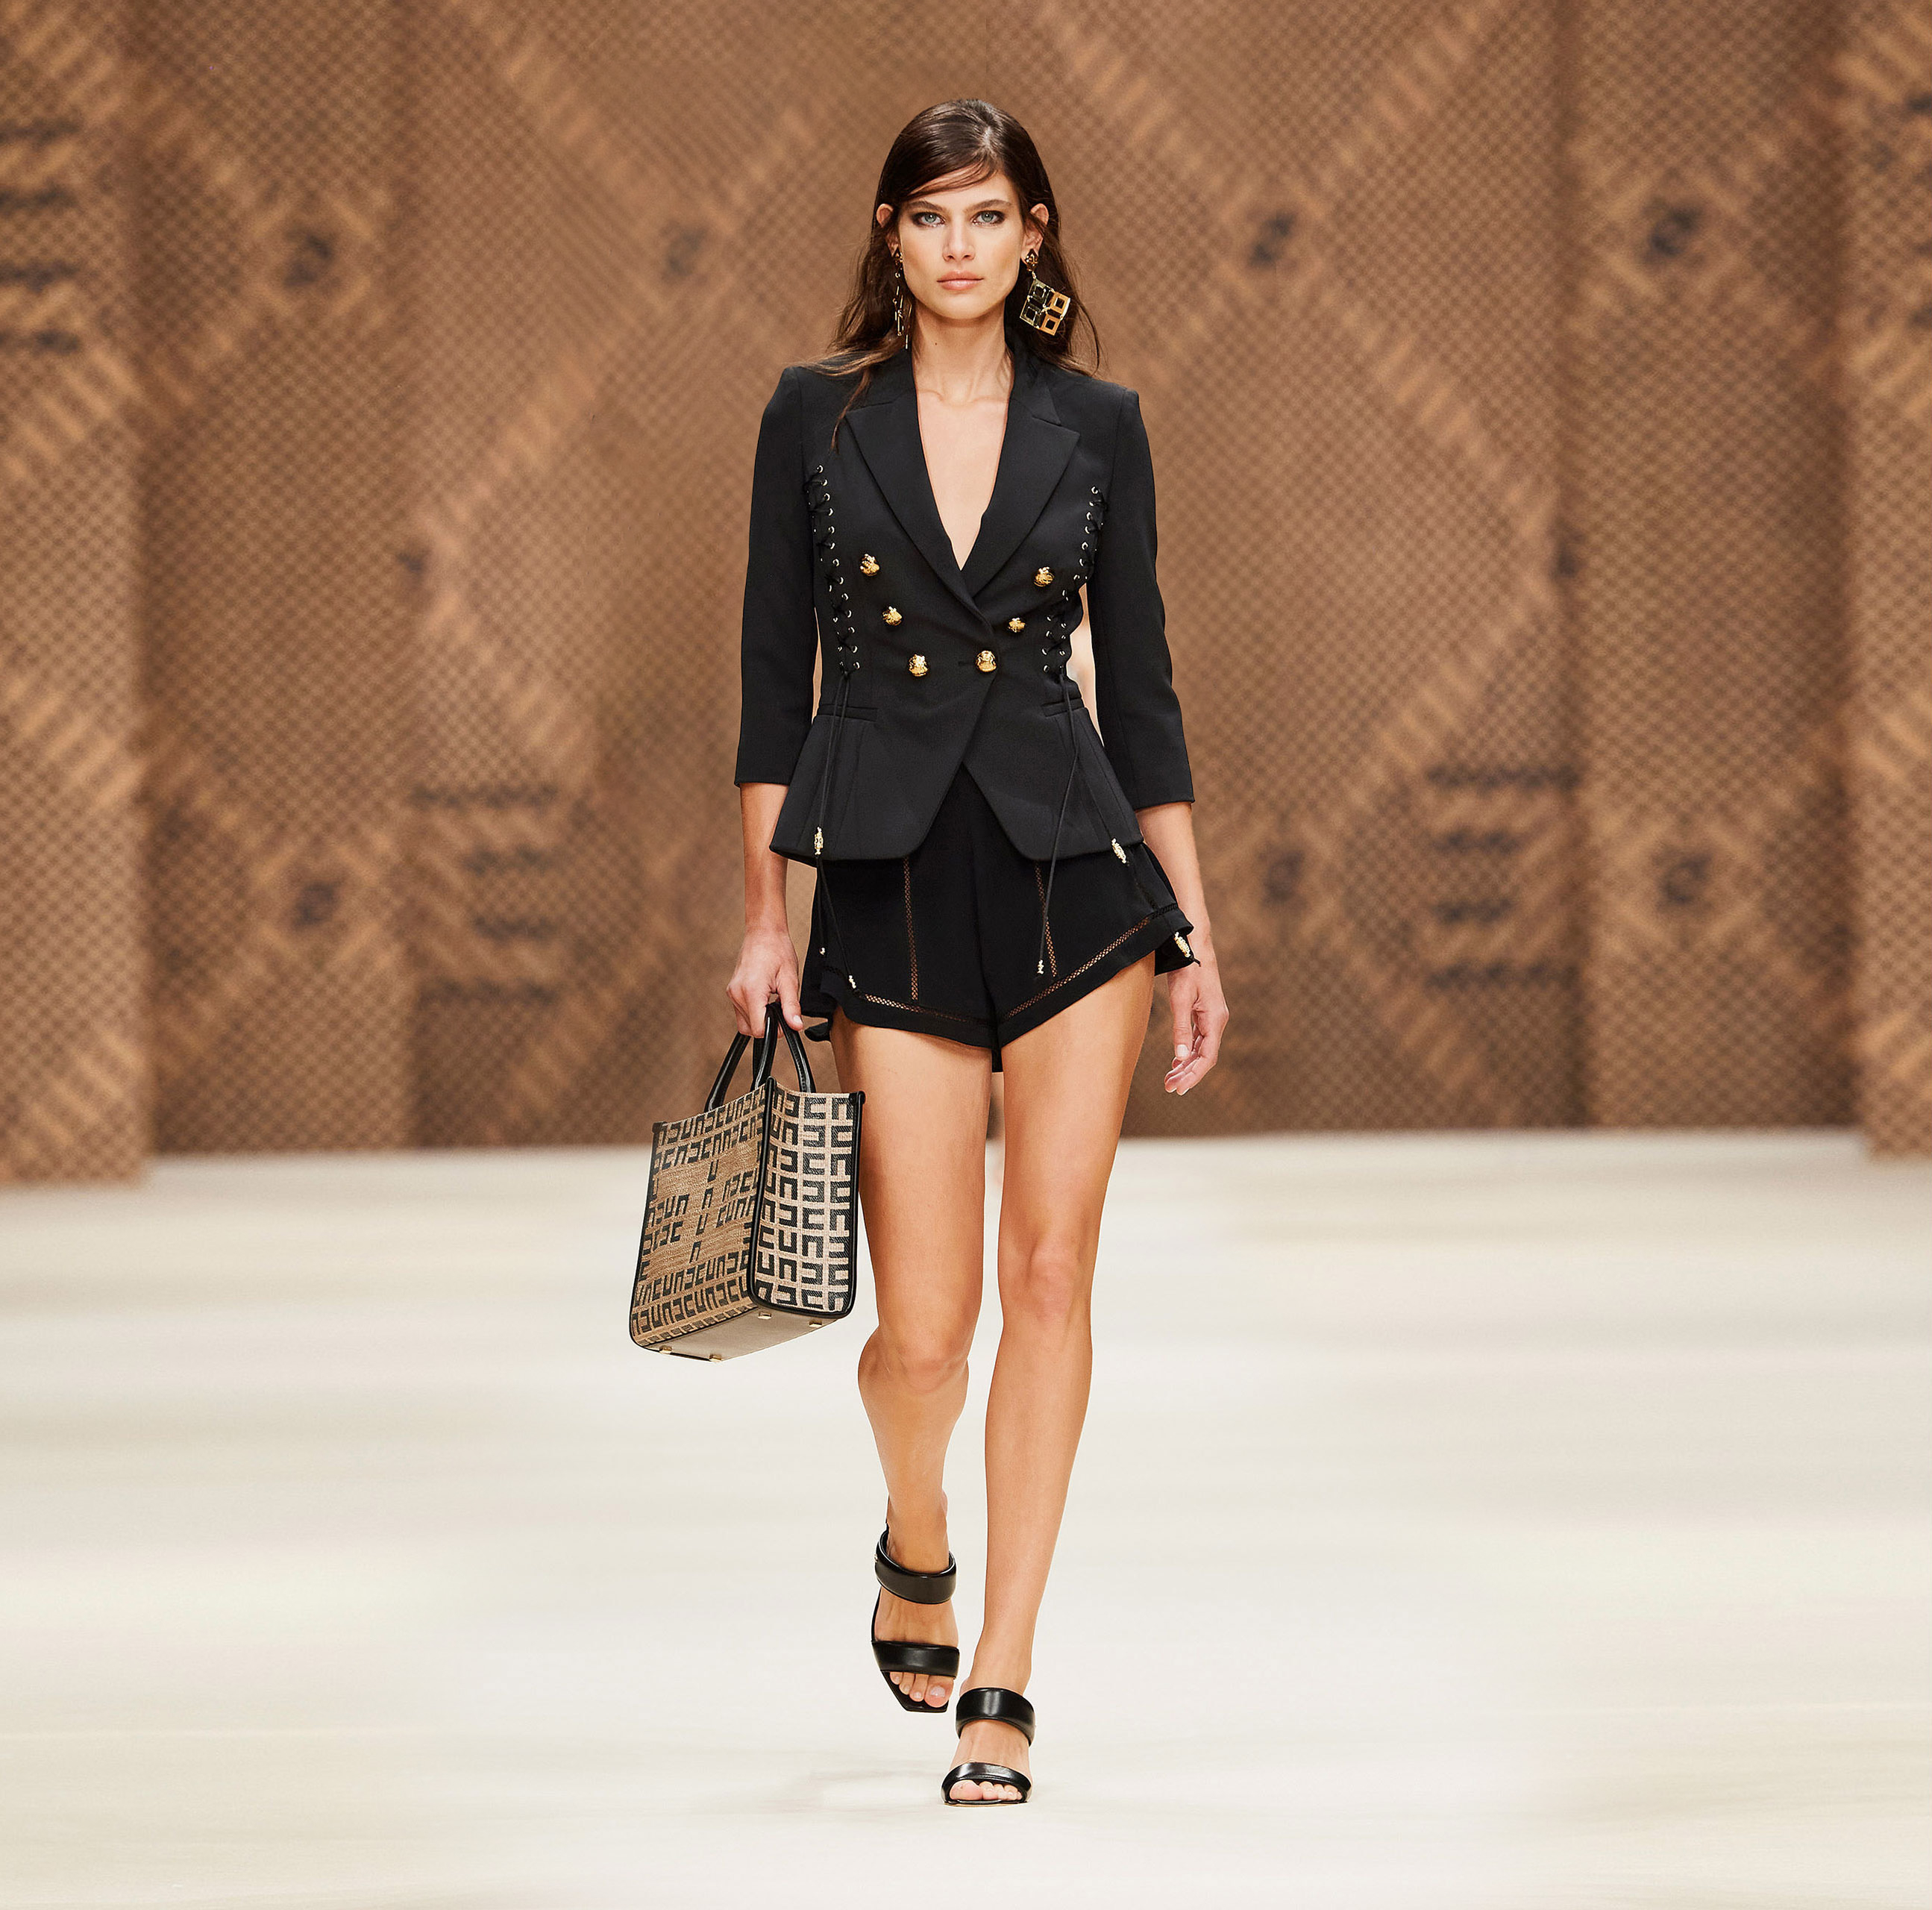 Double-breasted jacket with criss-cross pattern - Elisabetta Franchi